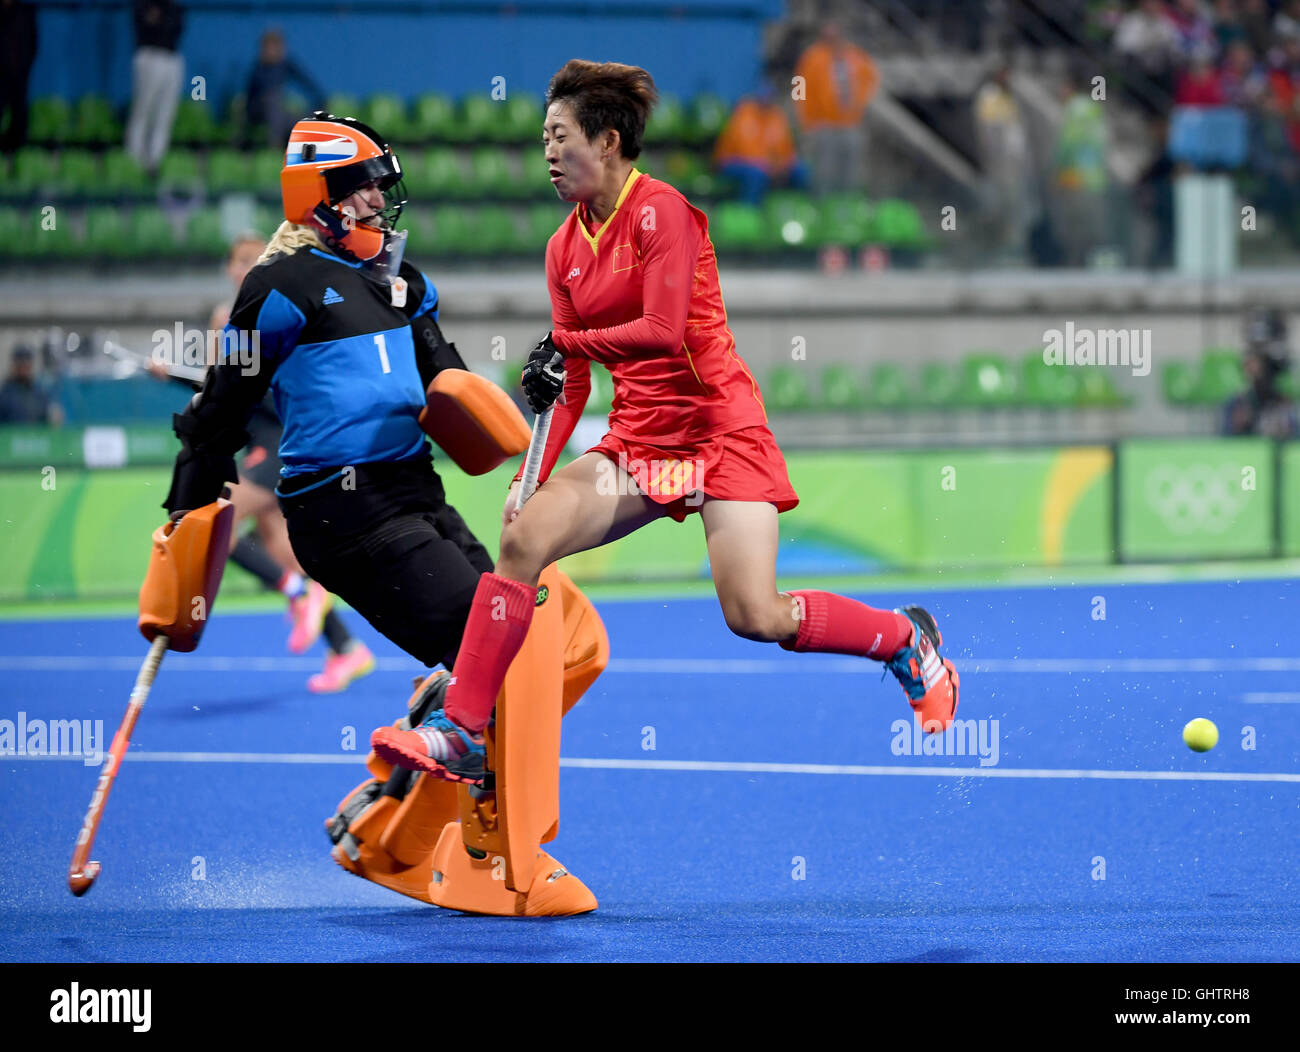 Rio De Janeiro, Brazil. 10th Aug, 2016. Zhang Xiaoxue (R) of China competes during the women's hockey pool A match between China and Netherlands at the 2016 Rio Olympic Games in Rio de Janeiro, Brazil, on Aug. 10, 2016. Netherlands won China with 1:0. Credit:  Wang Yuguo/Xinhua/Alamy Live News Stock Photo